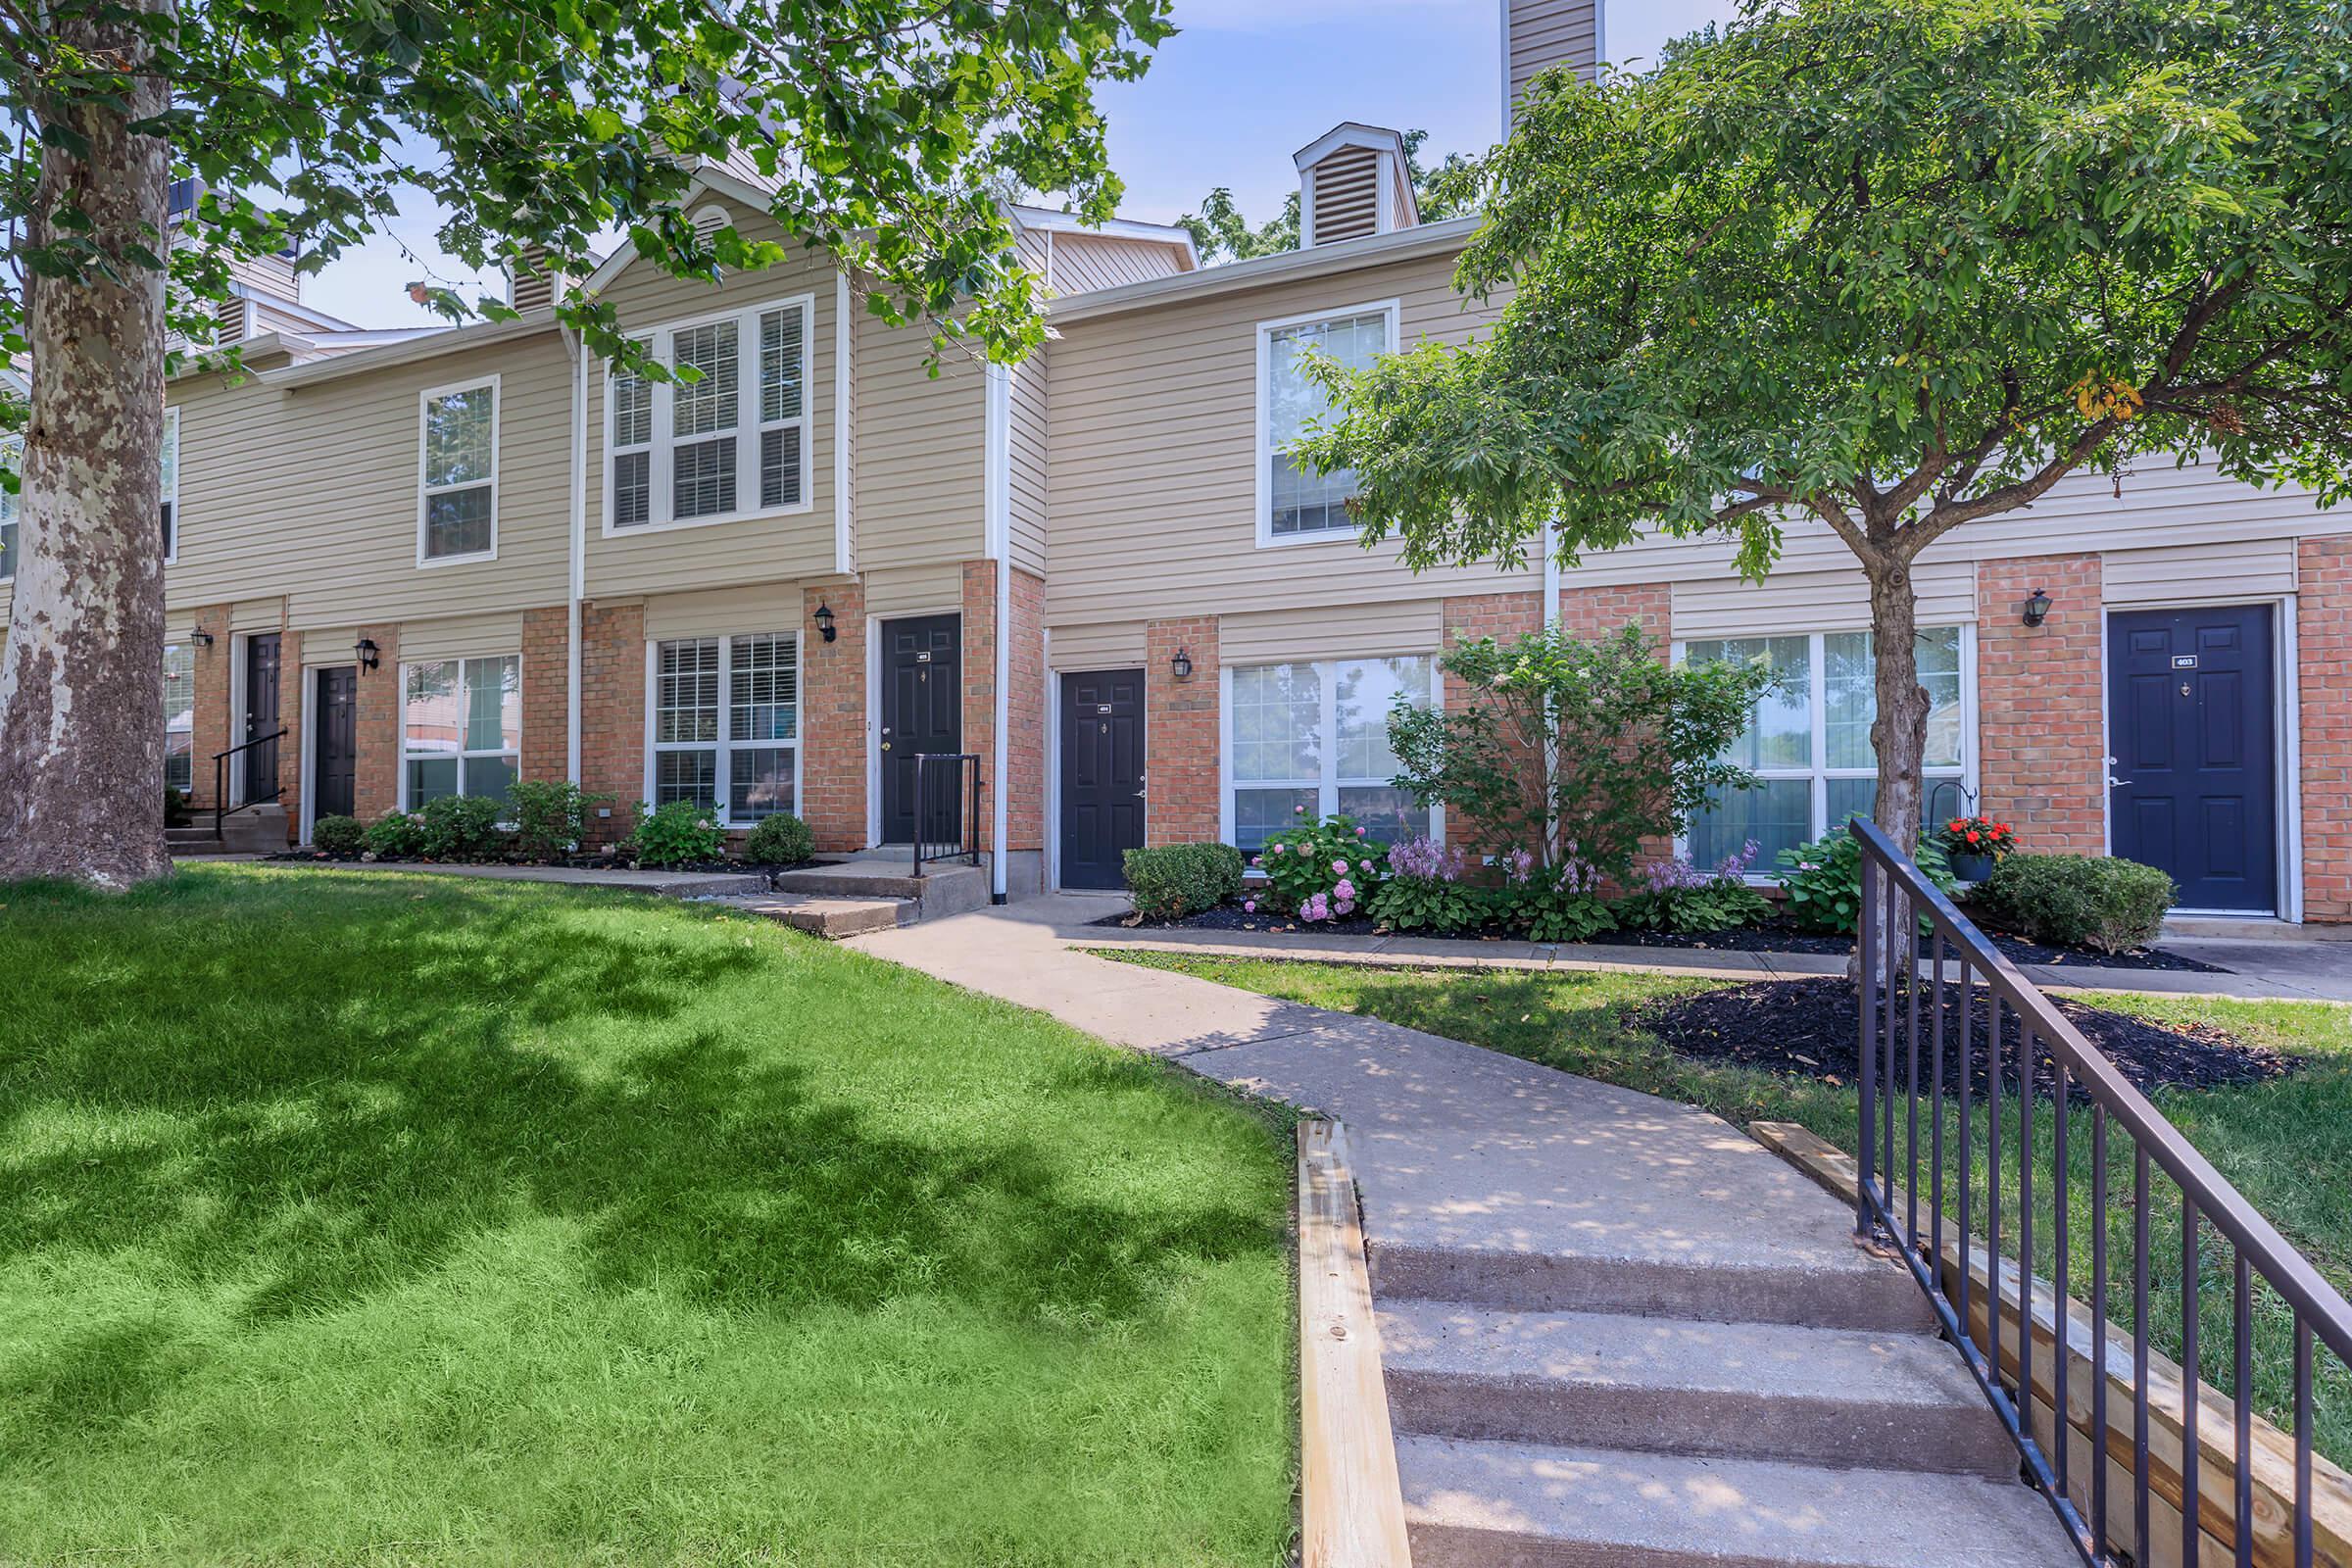 WE HOPE TO SEE YOU SOON AT WILLIAMSBURG TOWNHOMES